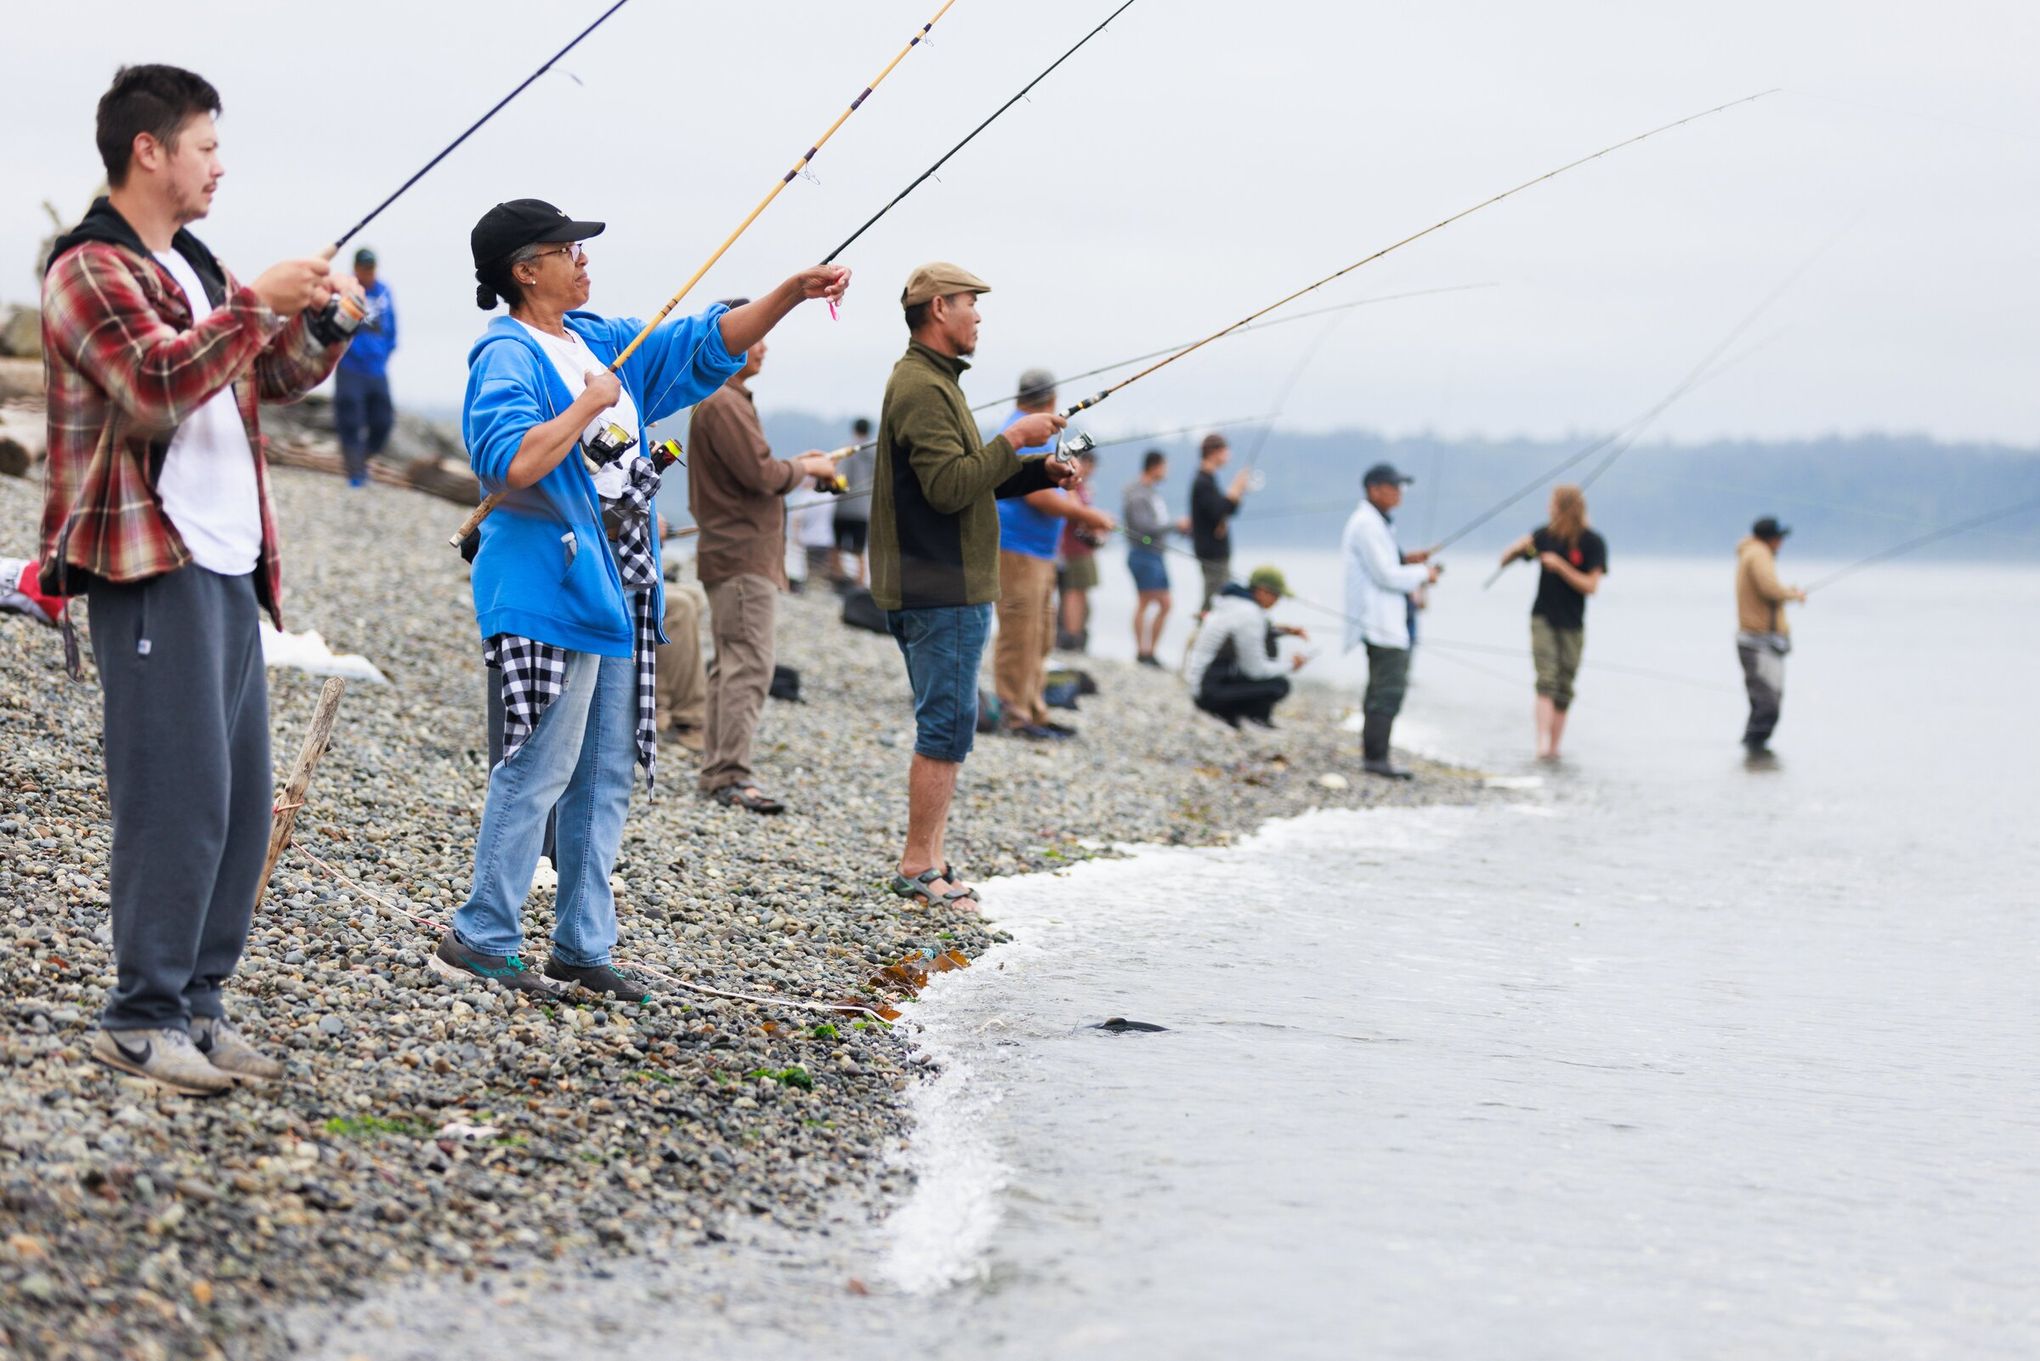 Catch a pink salmon without leaving the shore at this Seattle park